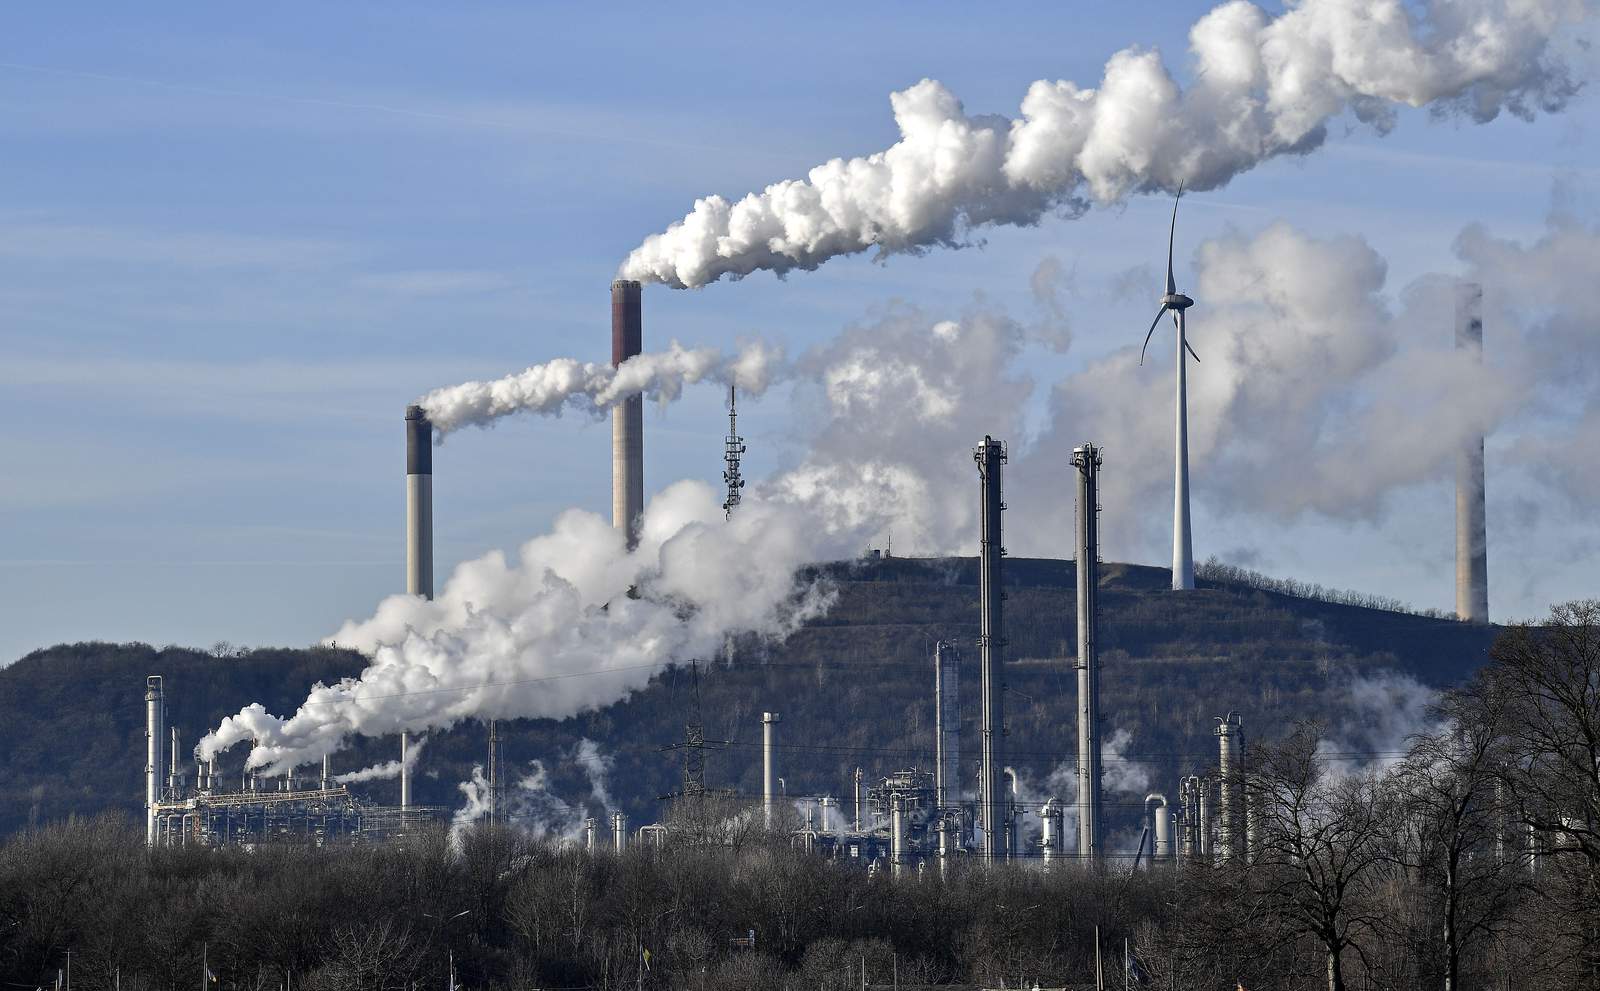 Germany finalizing plan to phase out coal energy